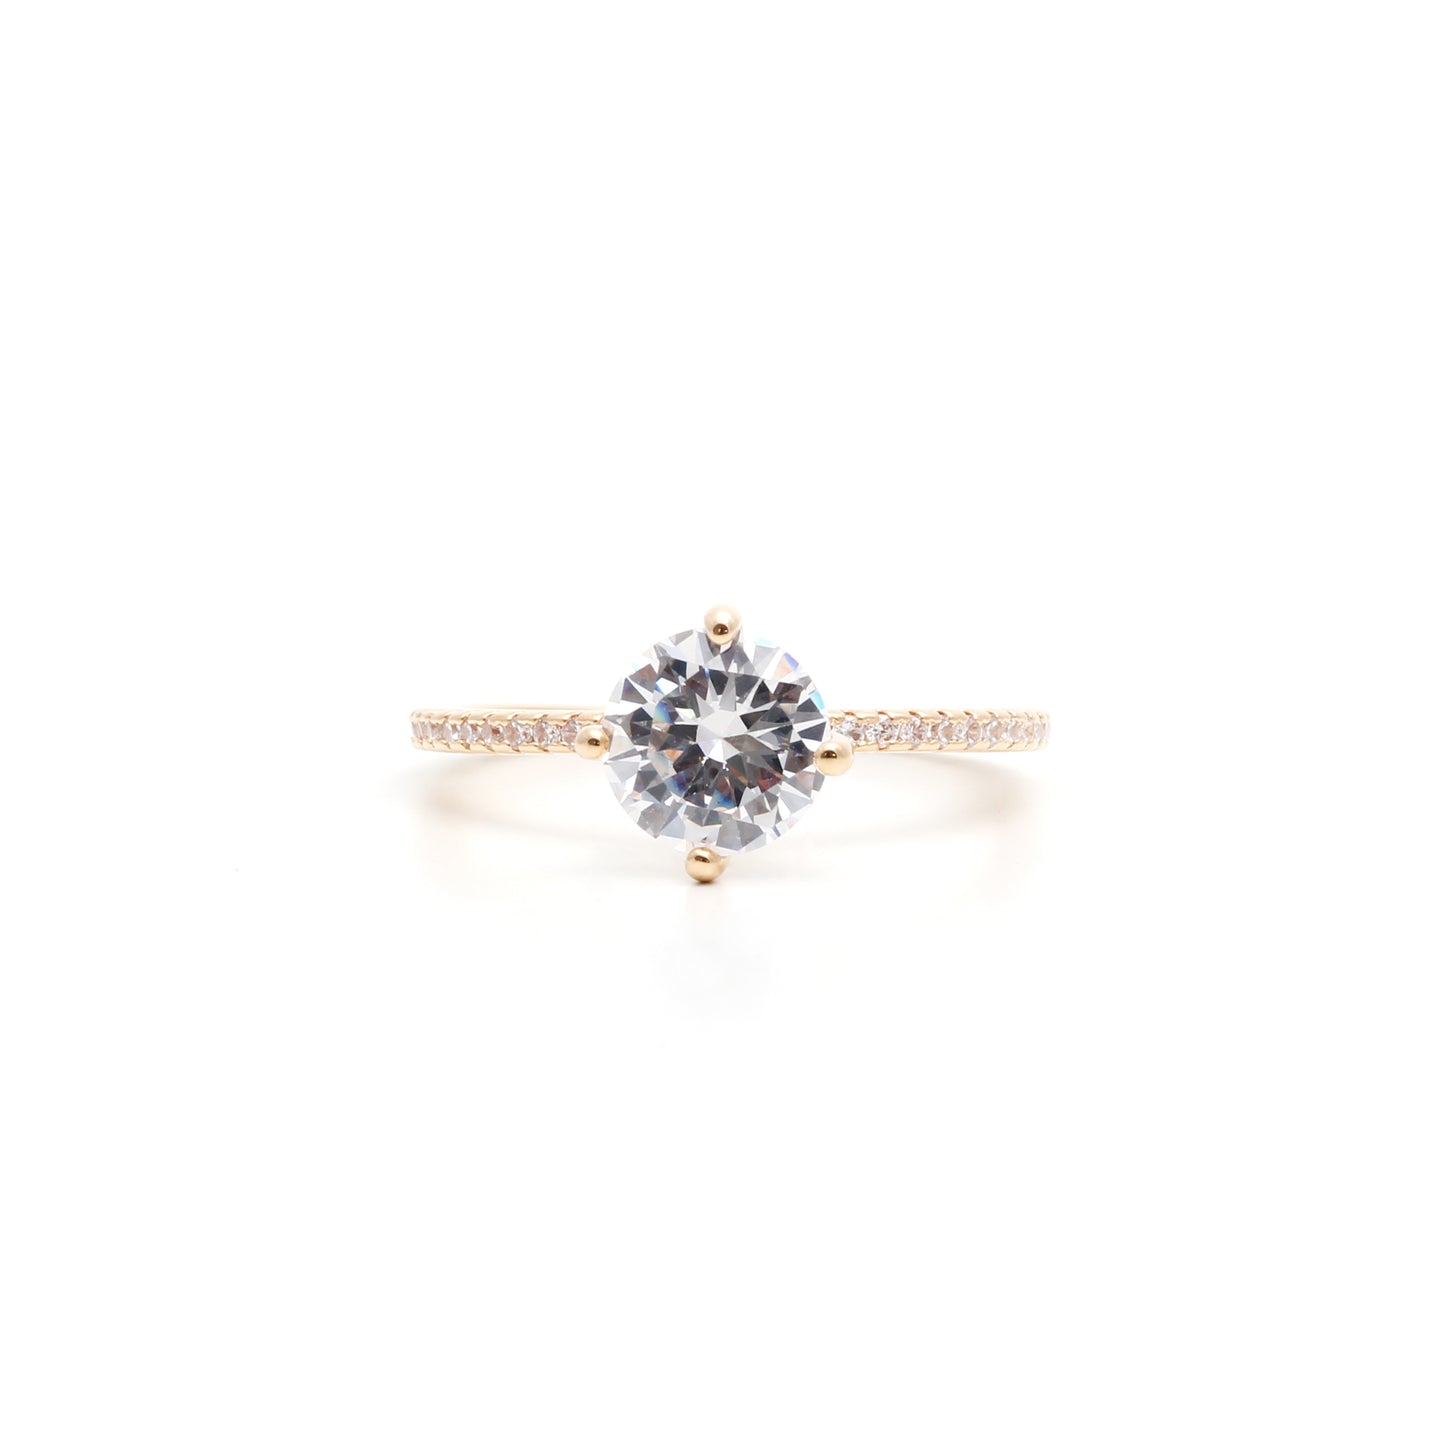 Solitaire ring with white CZ in 18K gold